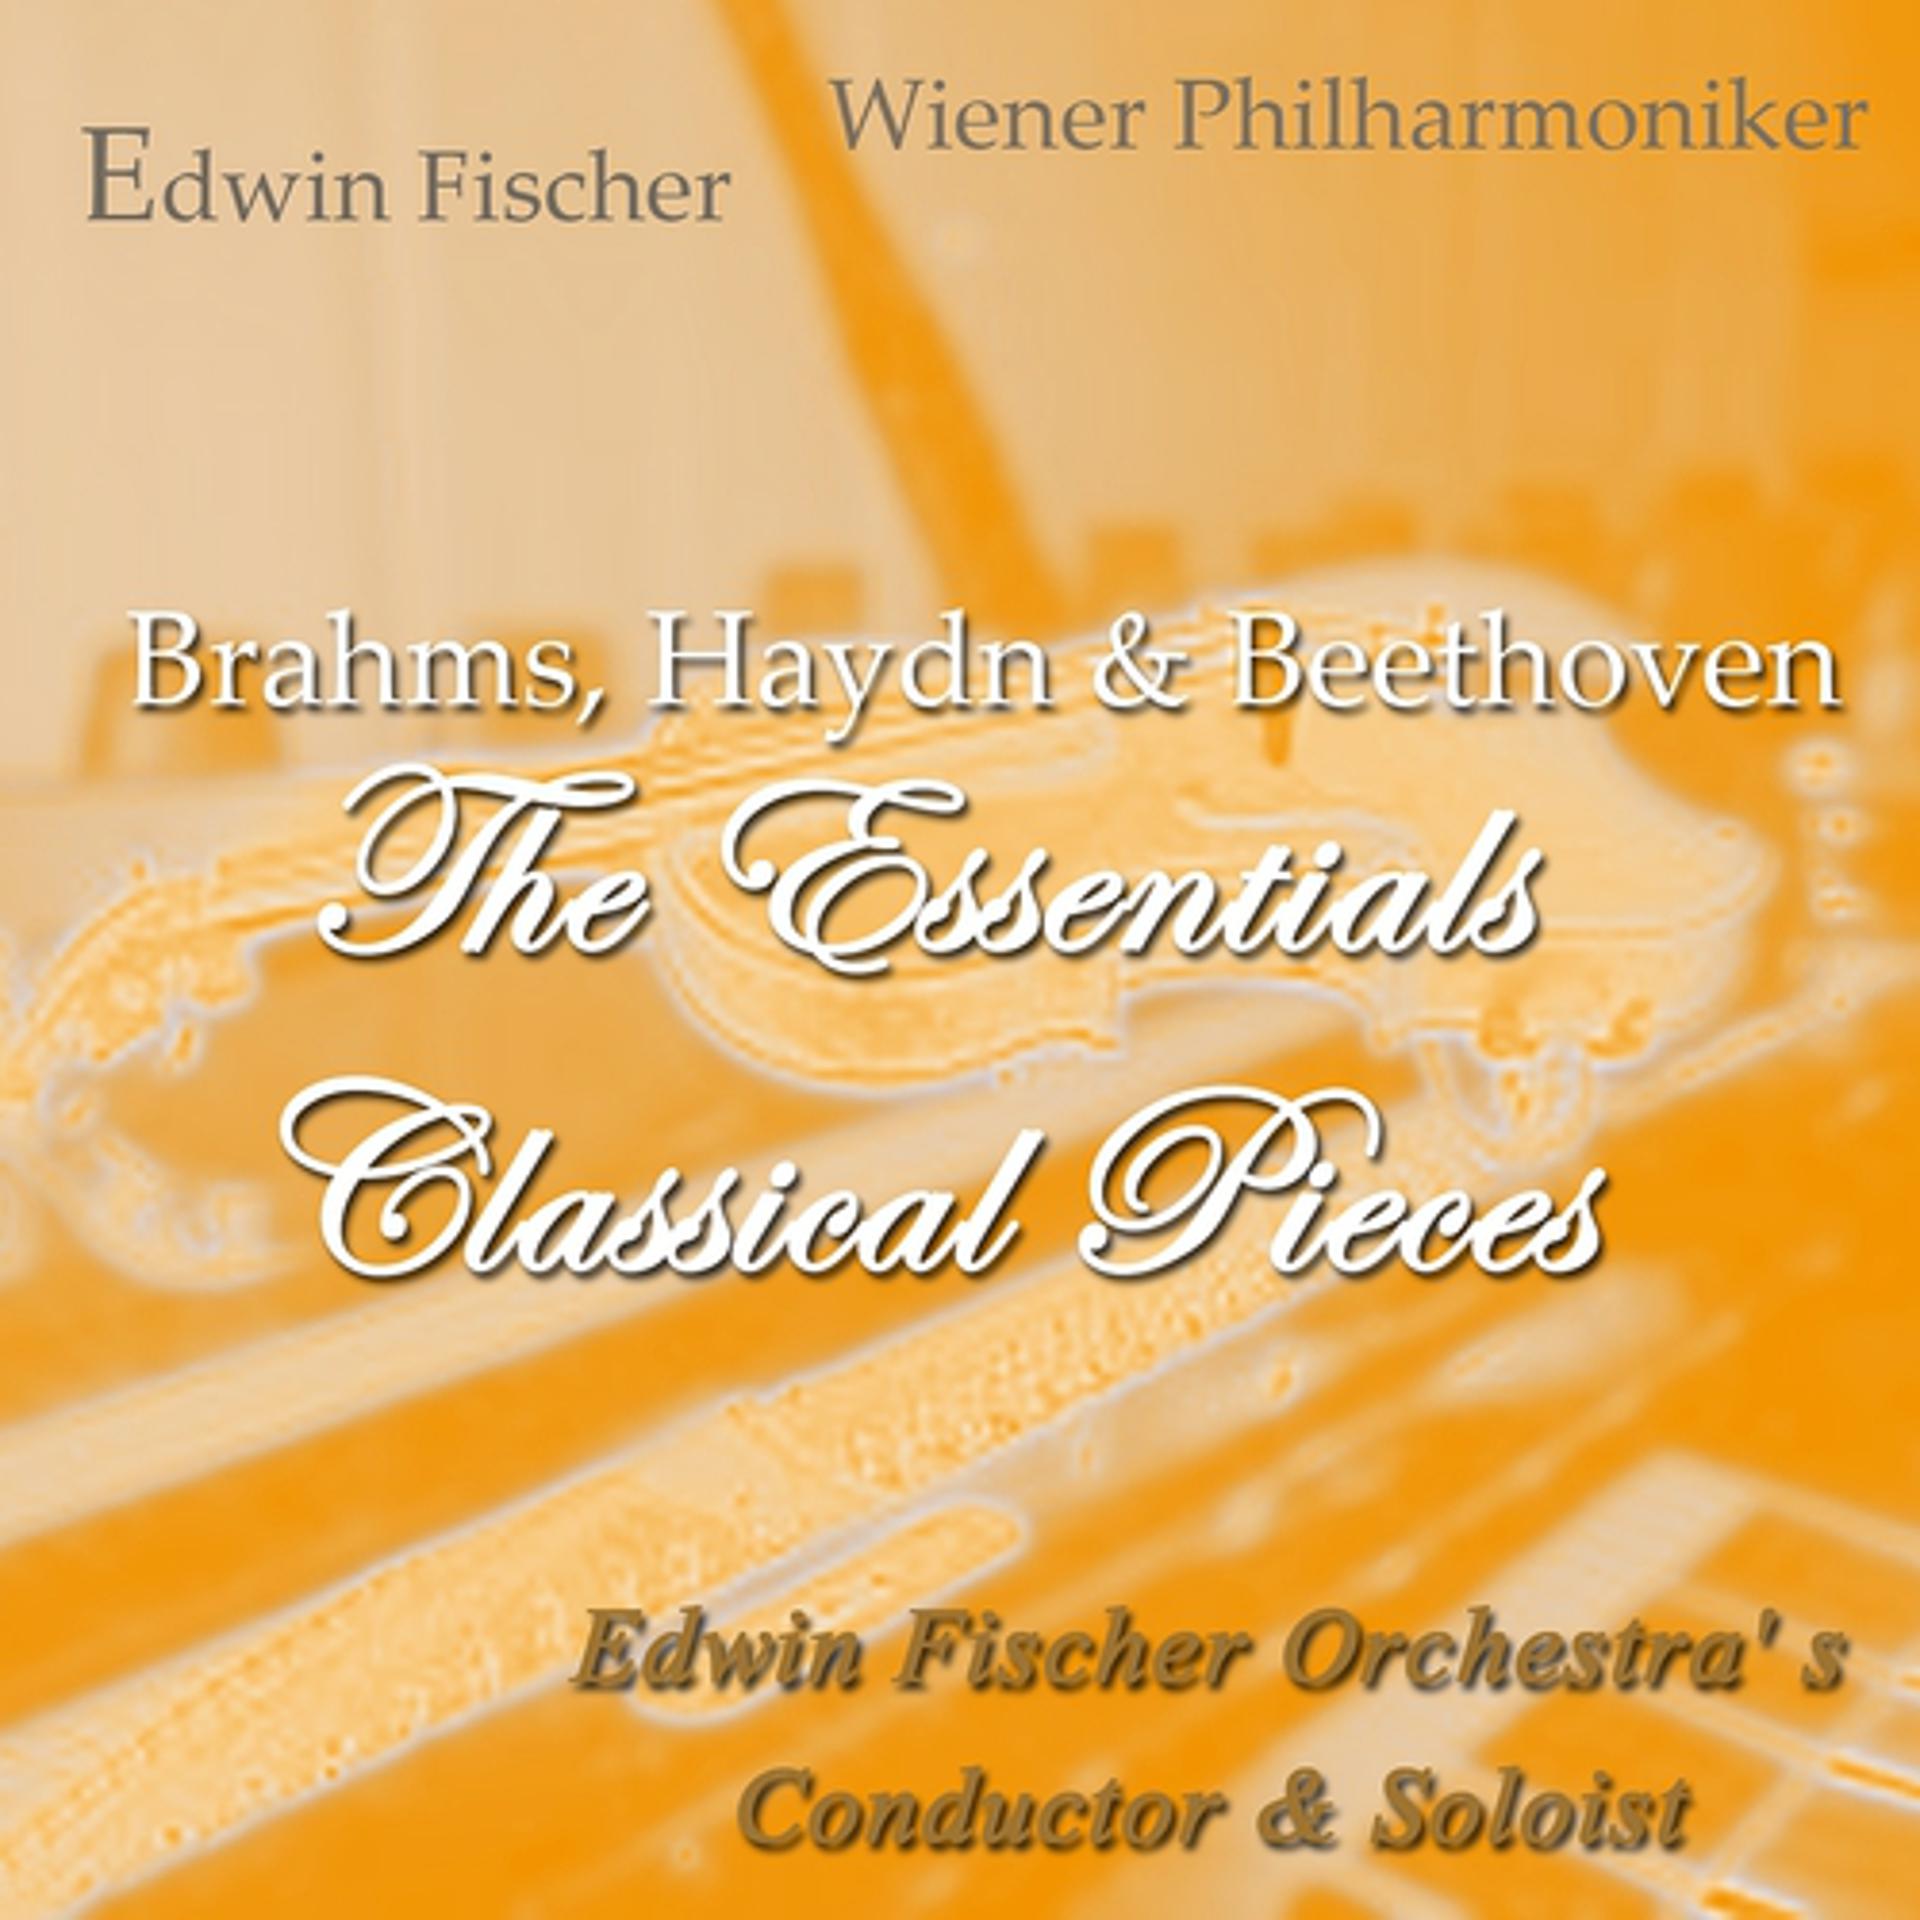 Постер альбома Brahms, Haydn & Beethoven: The Essentials Classical Pieces (Edwin Fischer: Orchestra' S Conductor & Soloist)